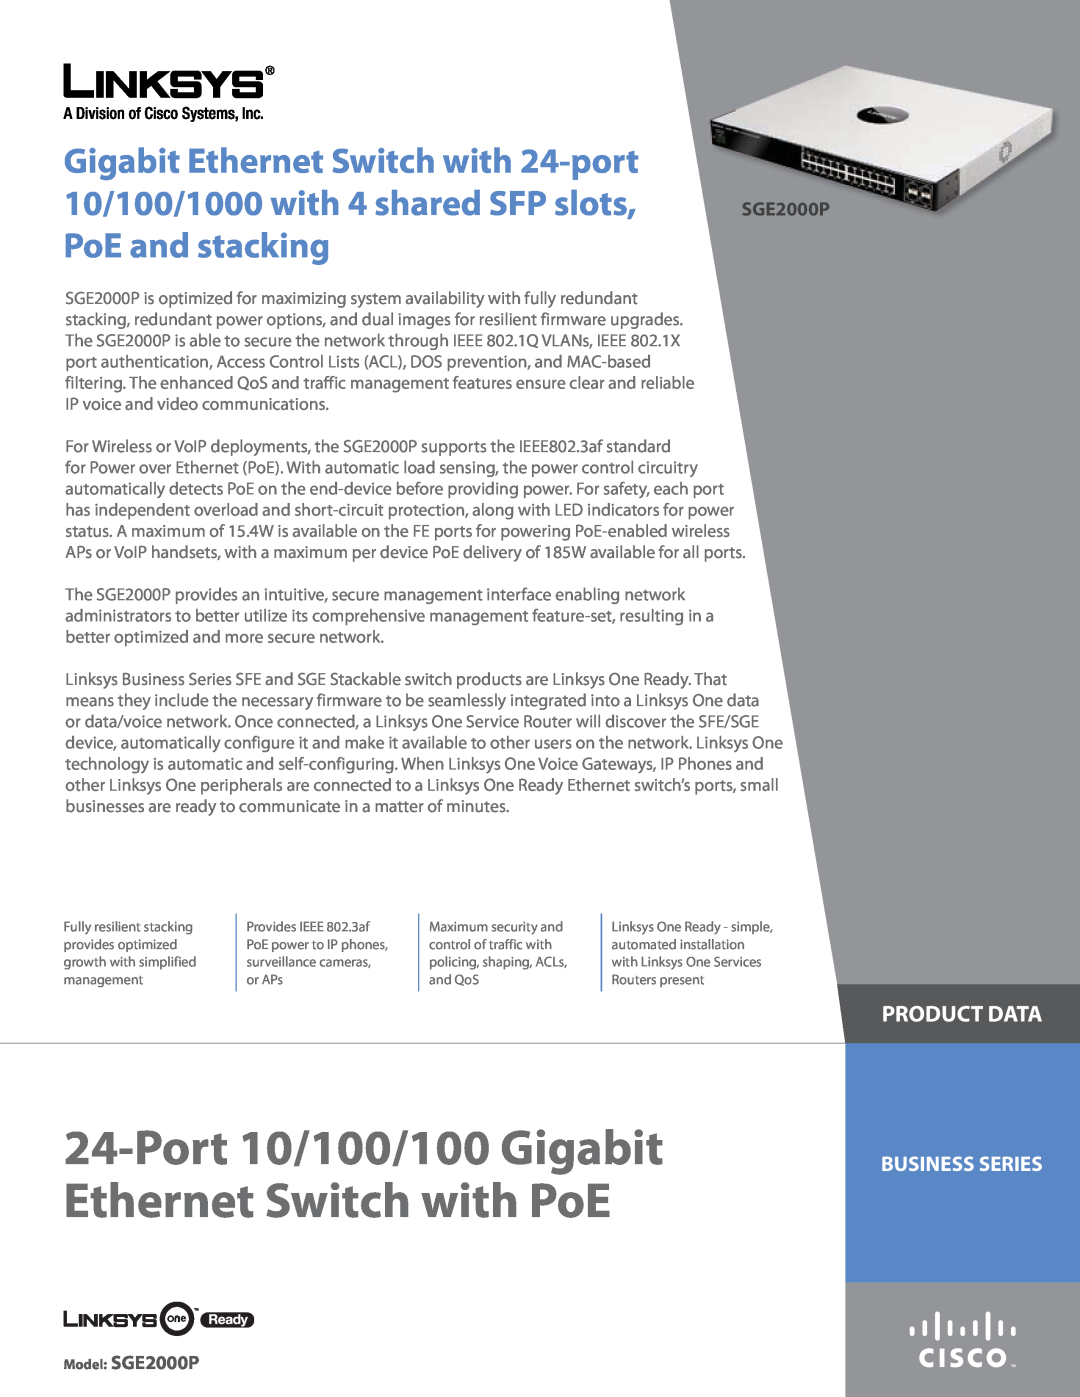 Linksys manual Product Data, Business Series, Port 10/100/100 Gigabit Ethernet Switch with PoE, Model SGE2000P 